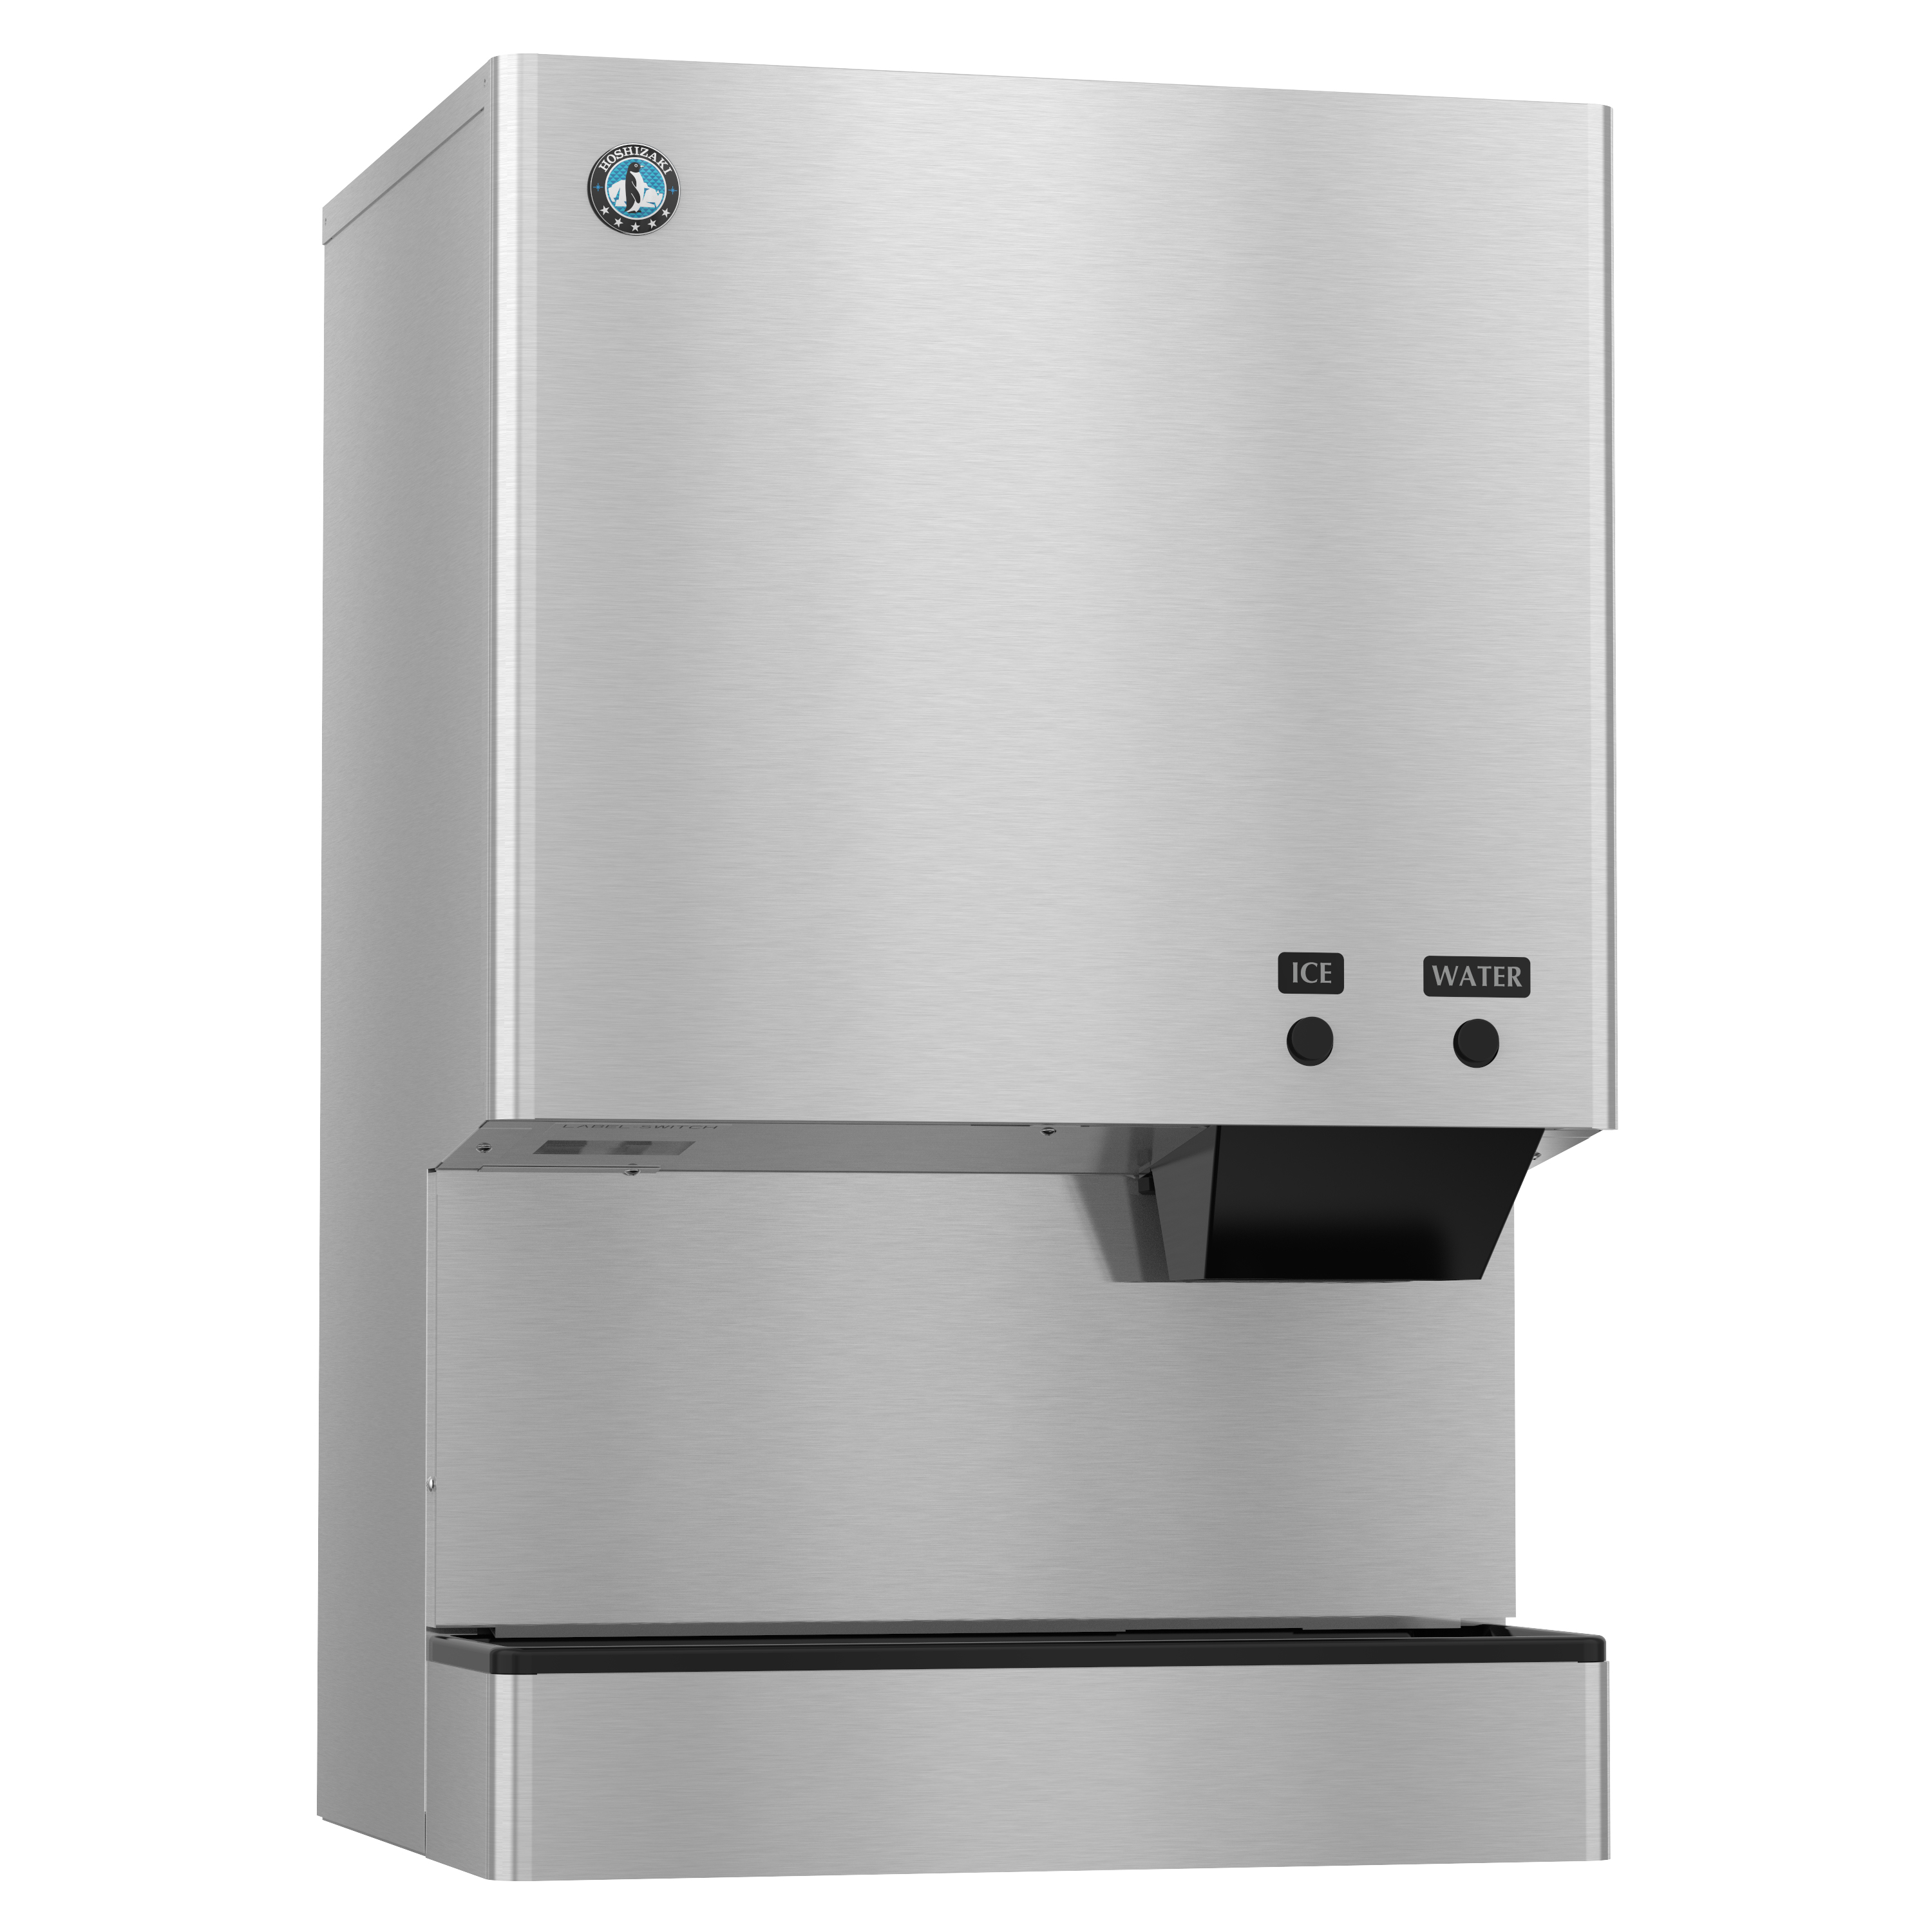 DCM-500BWH, Cubelet Icemaker, Water-cooled, Built in Storage Bin